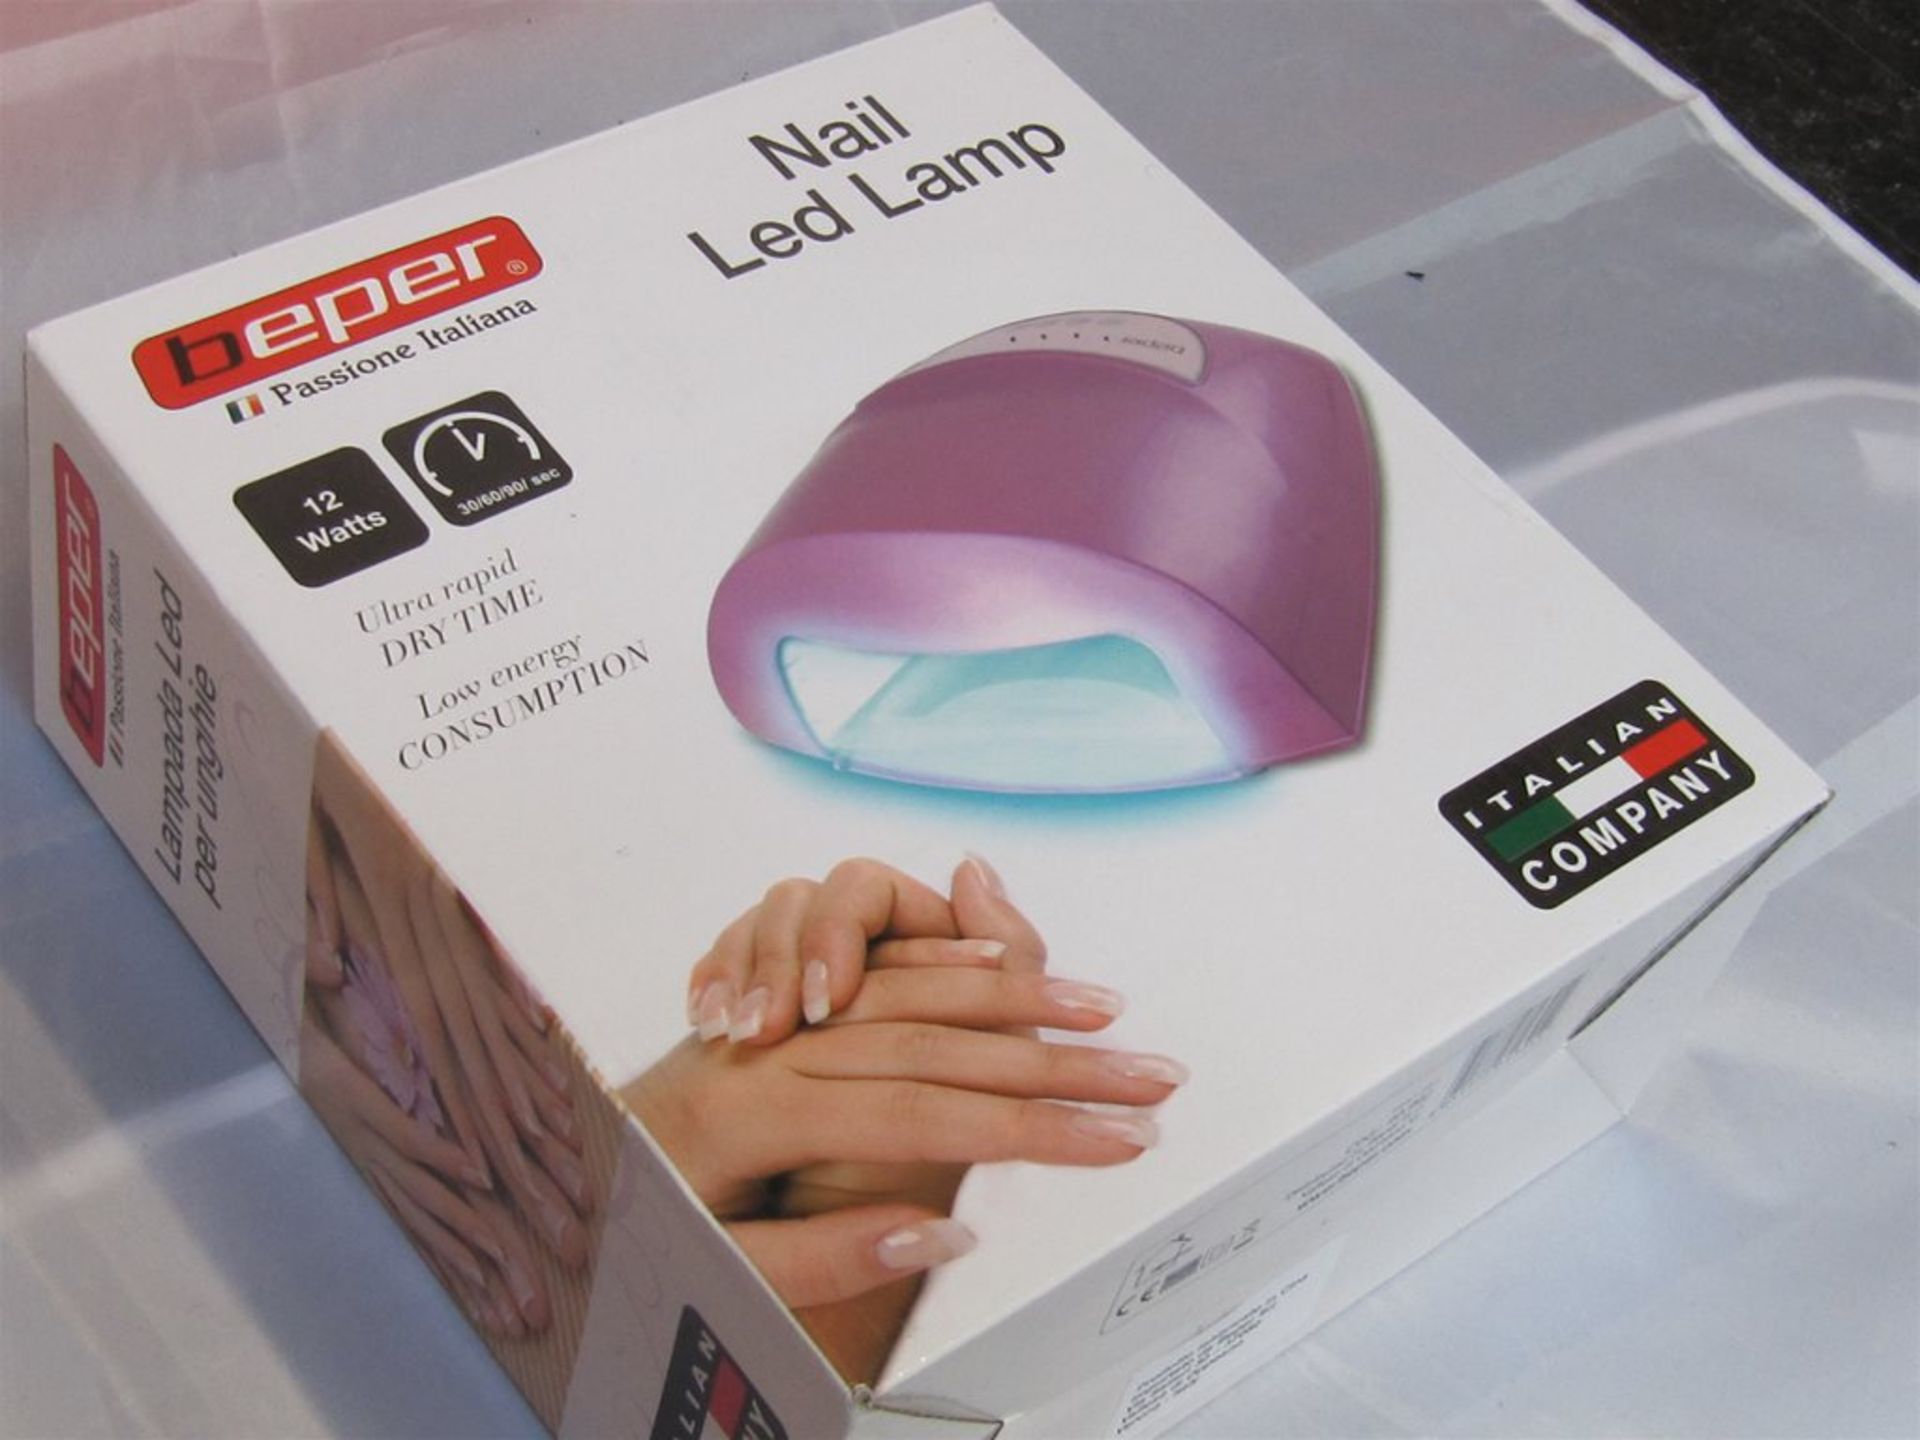 70) Beper LED Nail Lamp. 12w Rapid Dry Time. No vat on Hammer.